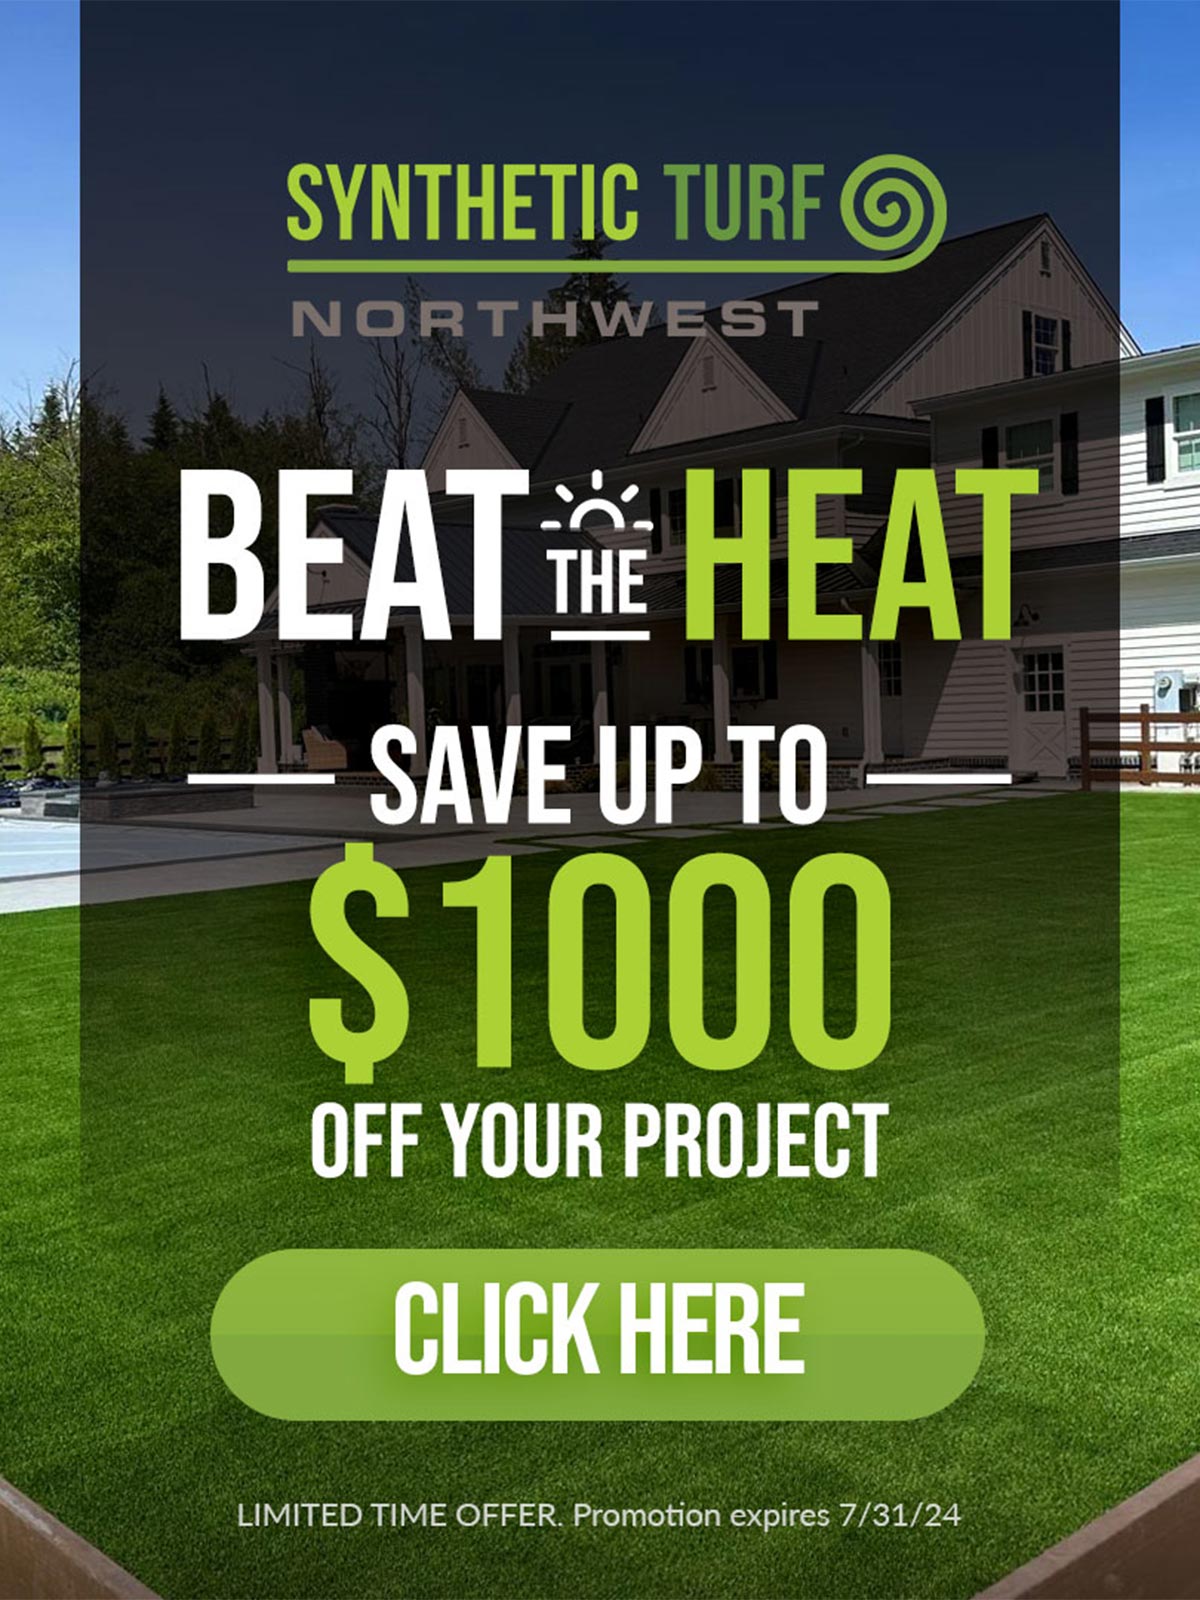 Beat the heat, save up to $1000!